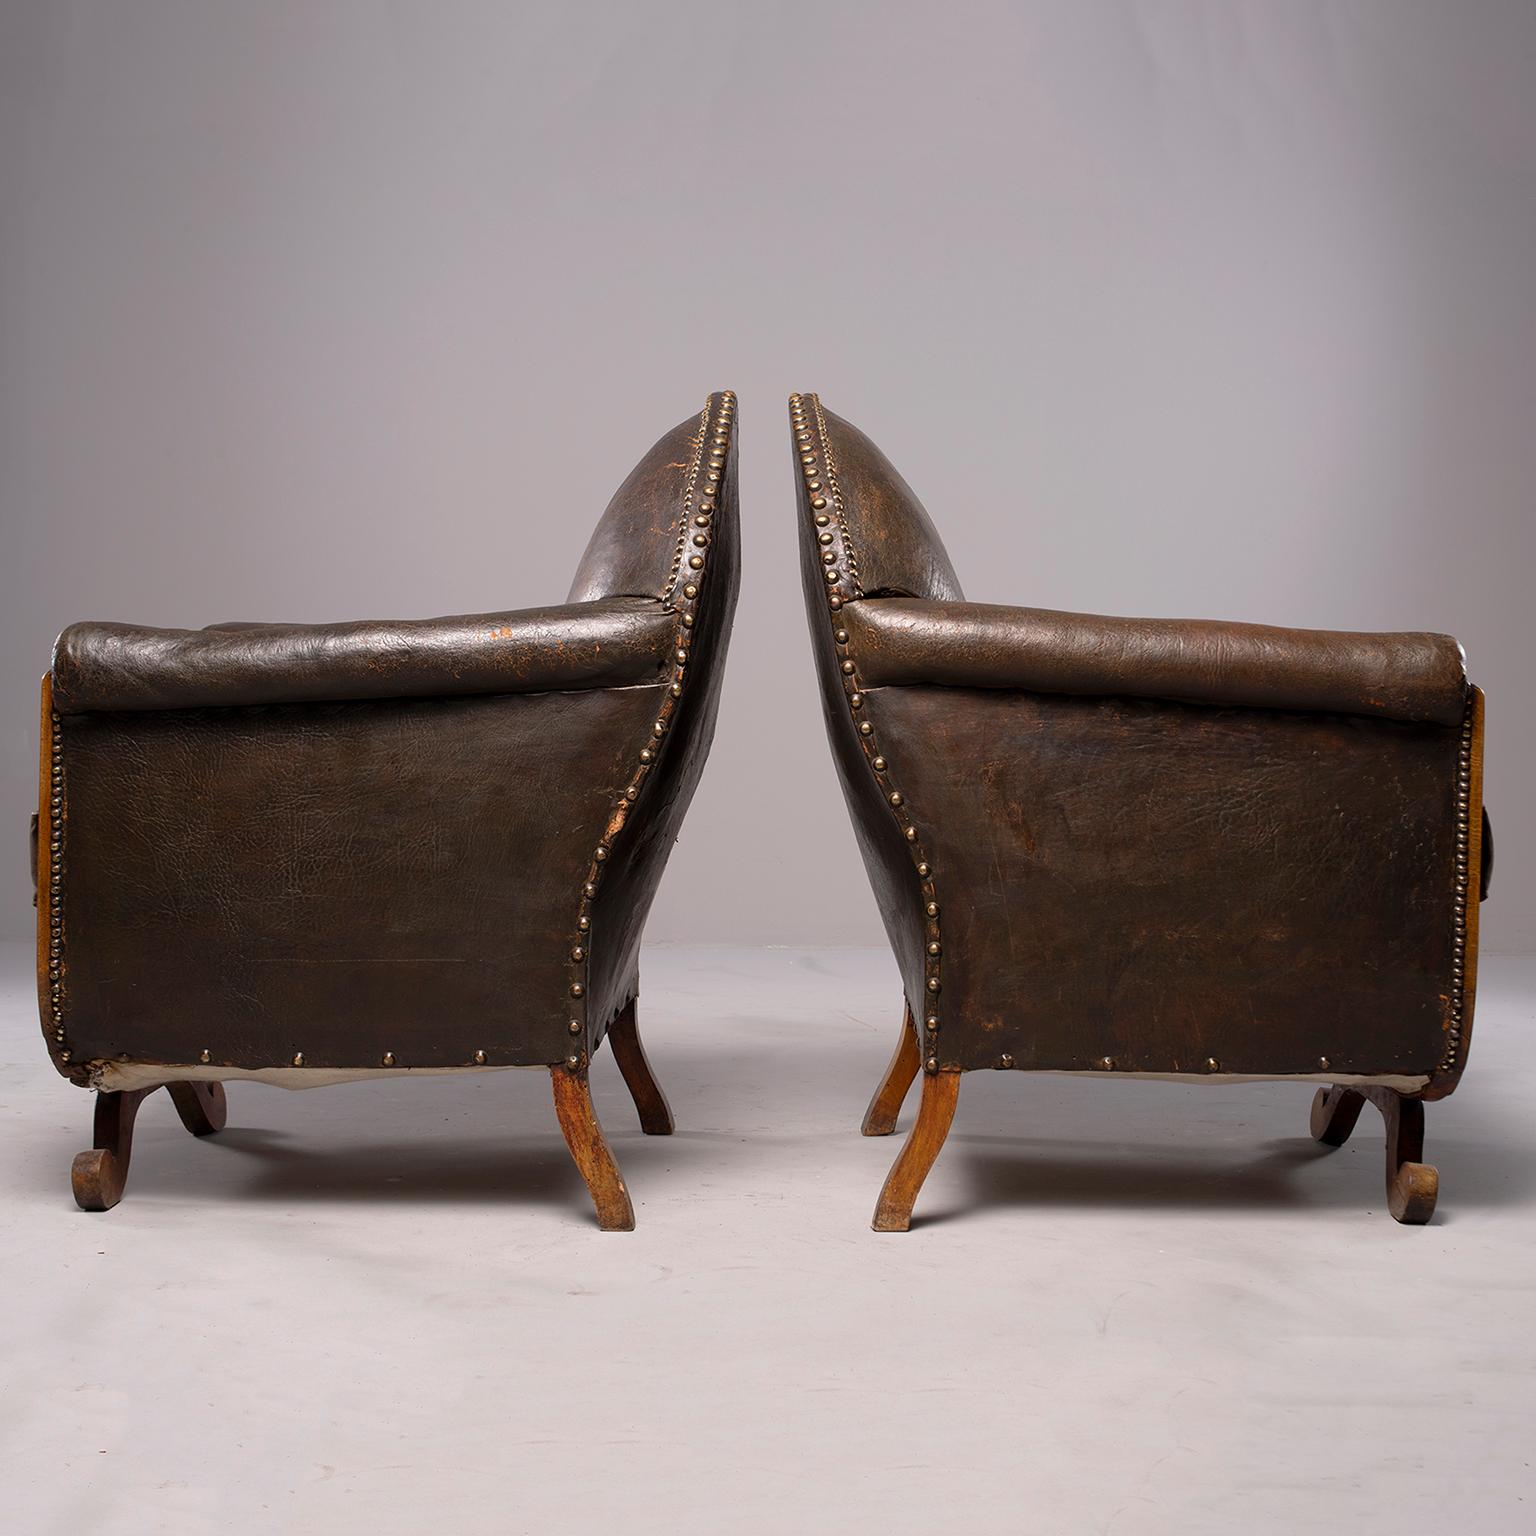 Pair of French leather club chairs with wood frames, circa 1930s. Camel back chairs with rolled arms, exposed wood frames, nailhead trim and curved, scrolled front leg. Original dark brown leather upholstery with dark brown velvet seat cushions.